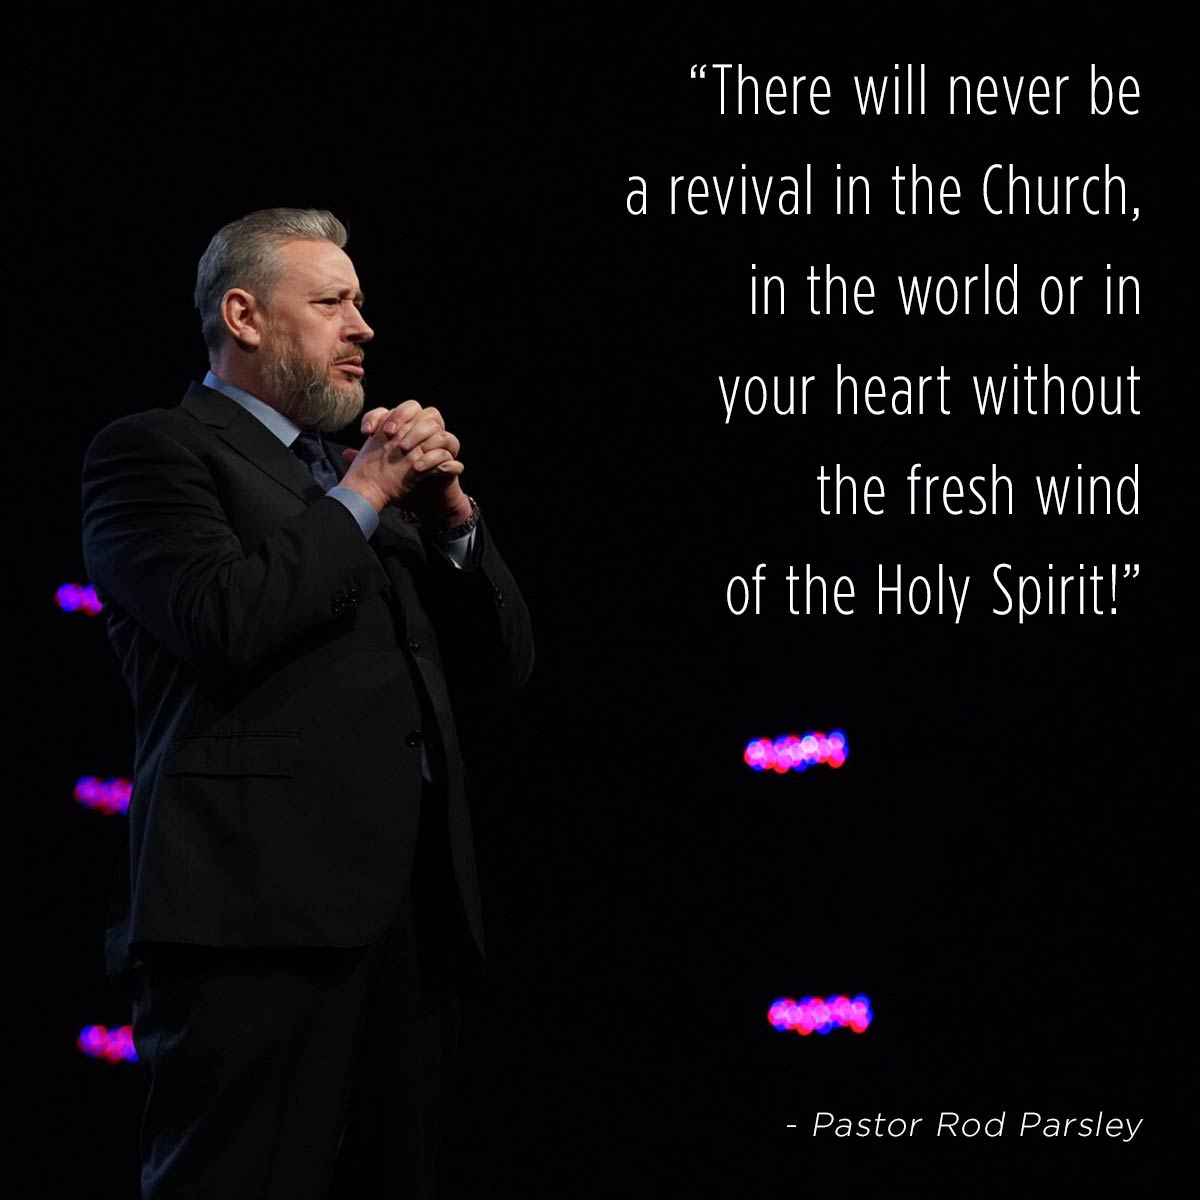 “There will never be a revival in the Church, in the world or in your heart without the fresh wind of the Holy Spirit!” – Pastor Rod Parsley